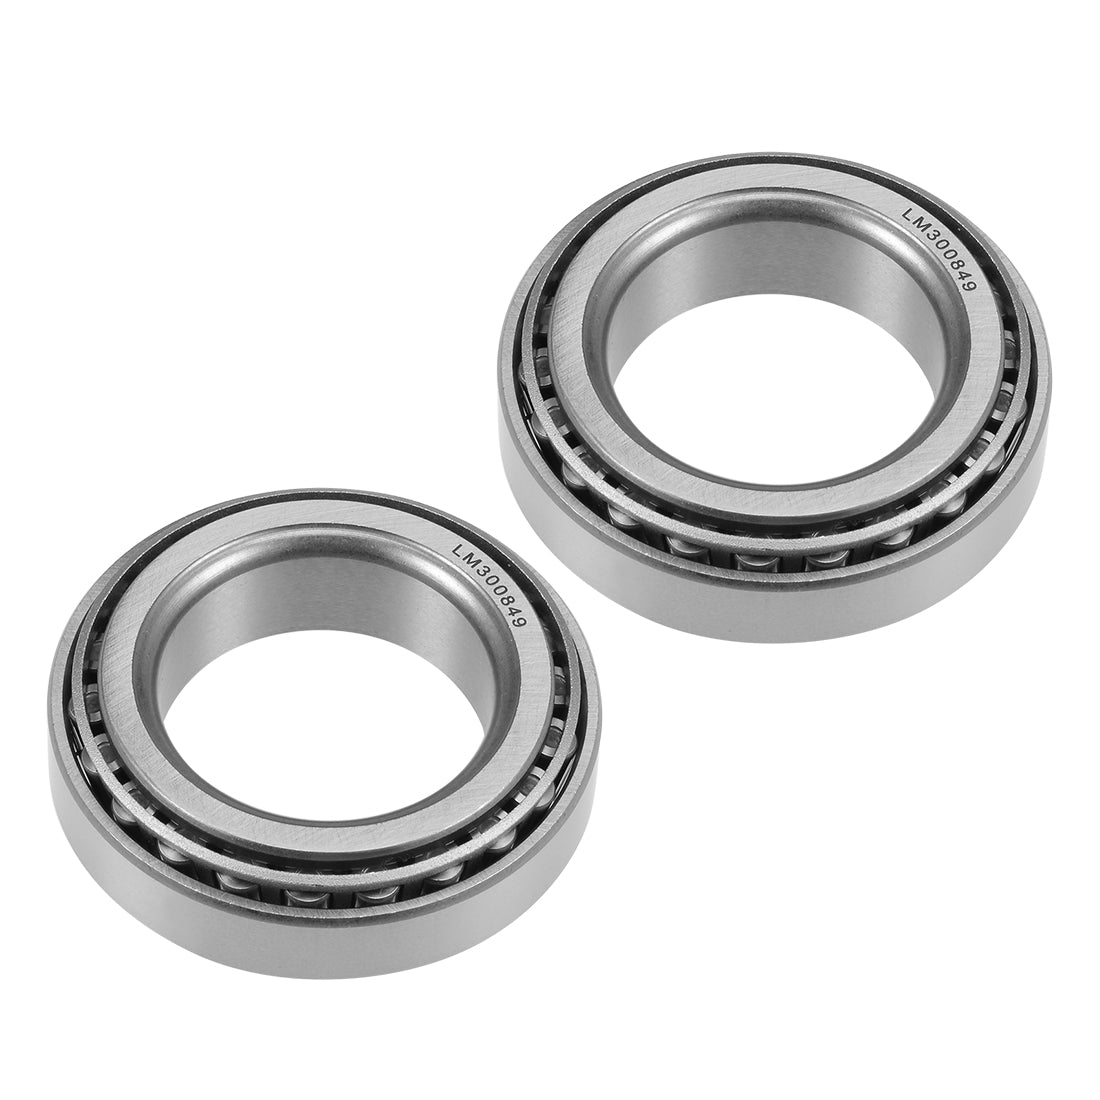 Uxcell Uxcell LM300849/LM300811 Tapered Roller Bearing Cone and Cup Set 1.61" Bore 2.676" O.D.